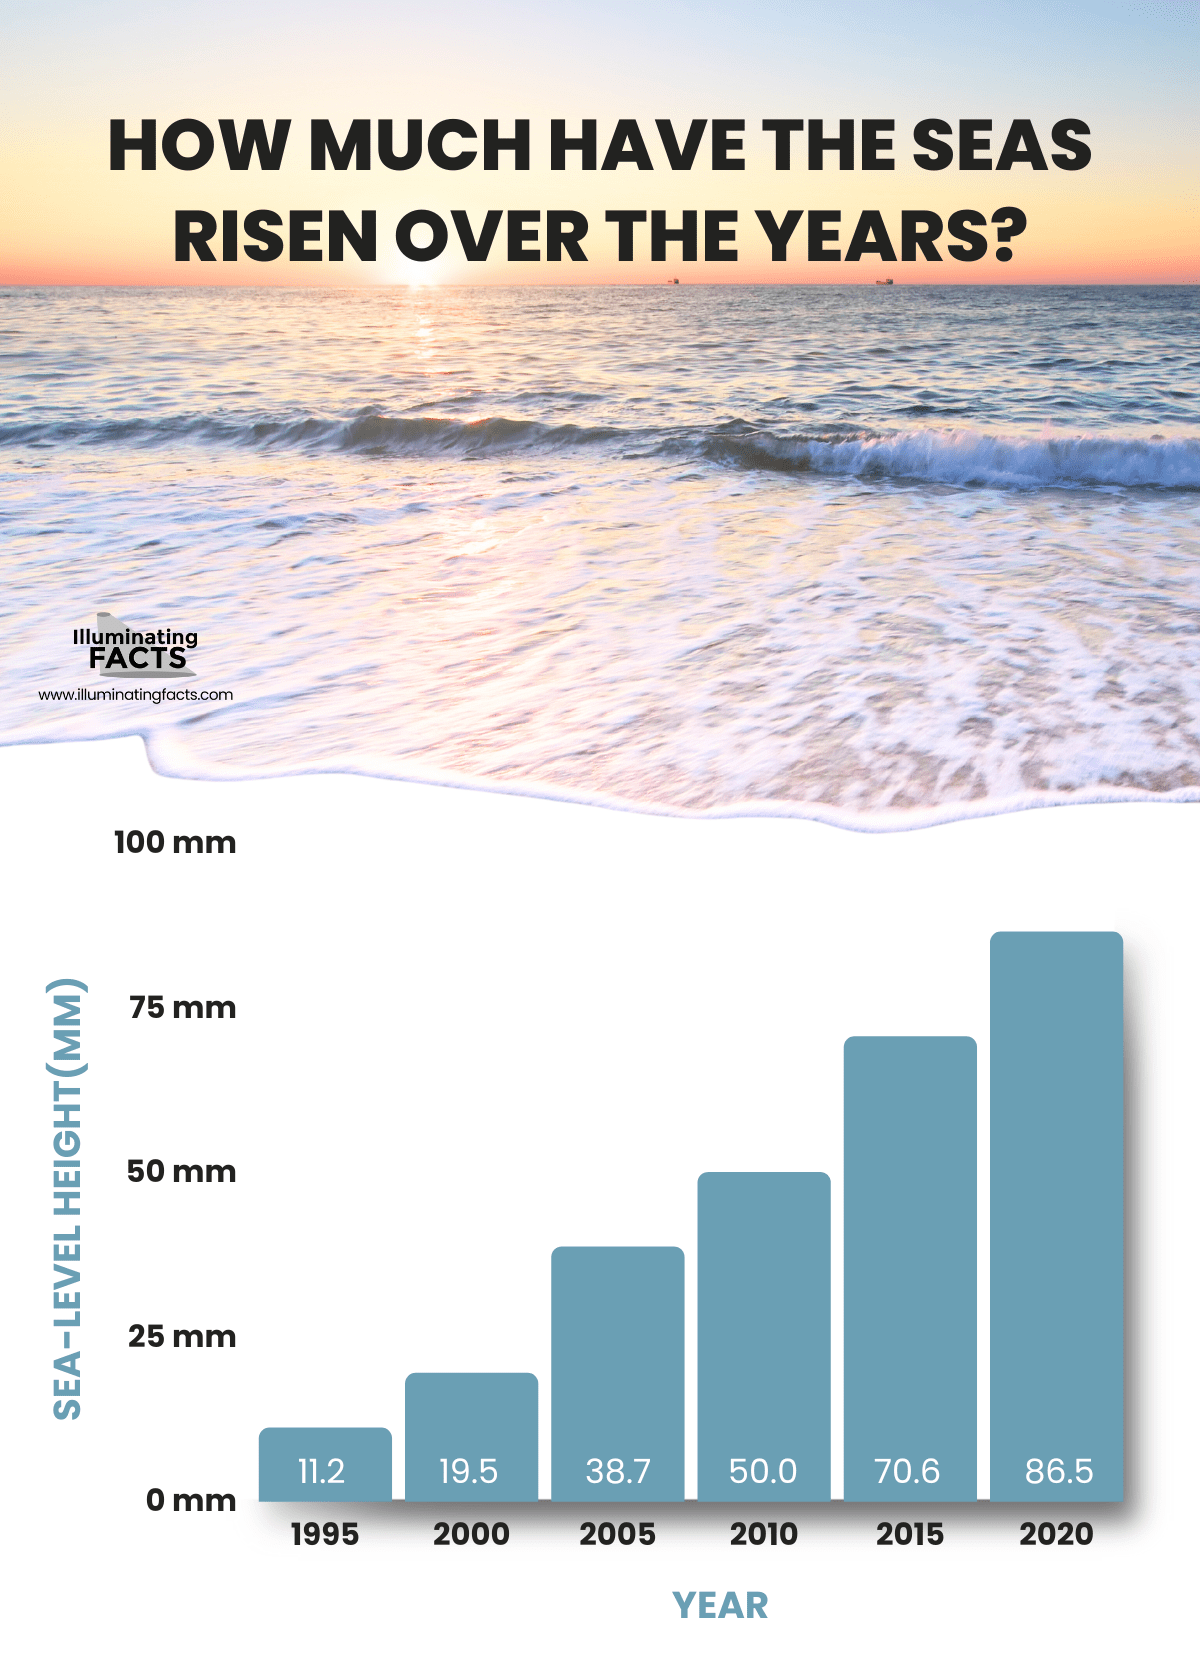 How much have the seas risen over the years